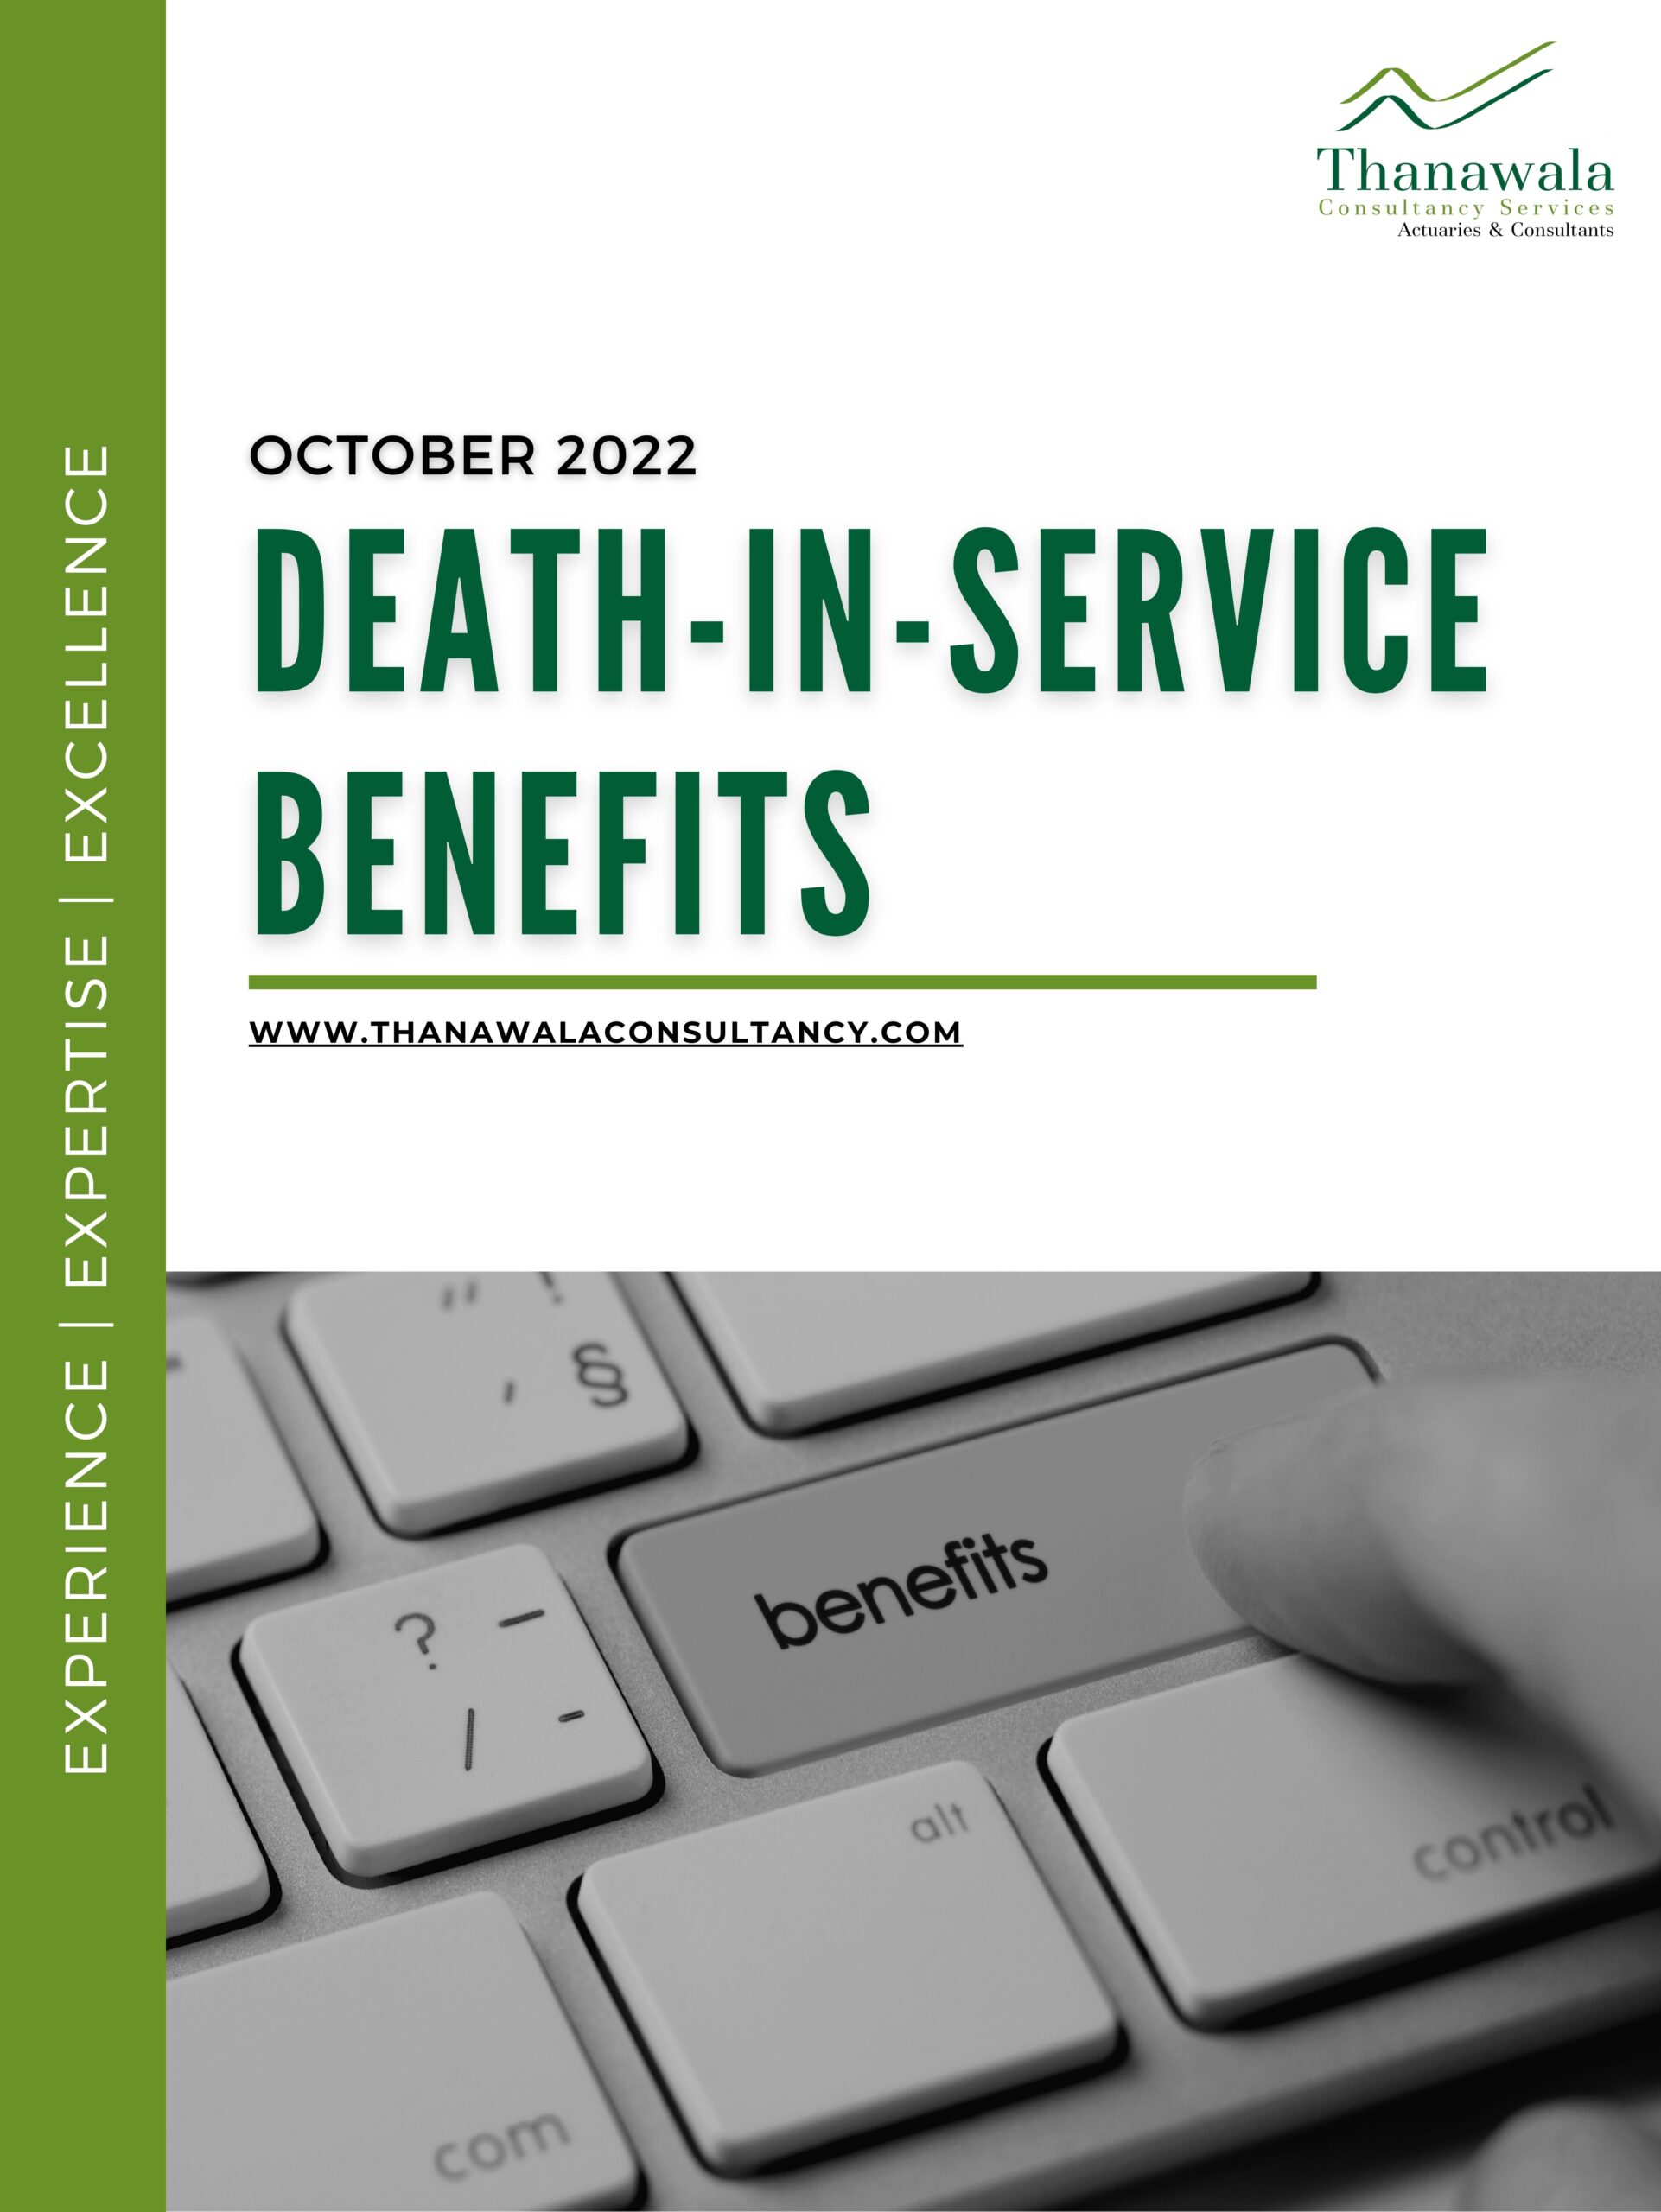 https://www.thanawalaconsultancy.com/wp-content/uploads/2022/11/death-in-services--scaled.jpg